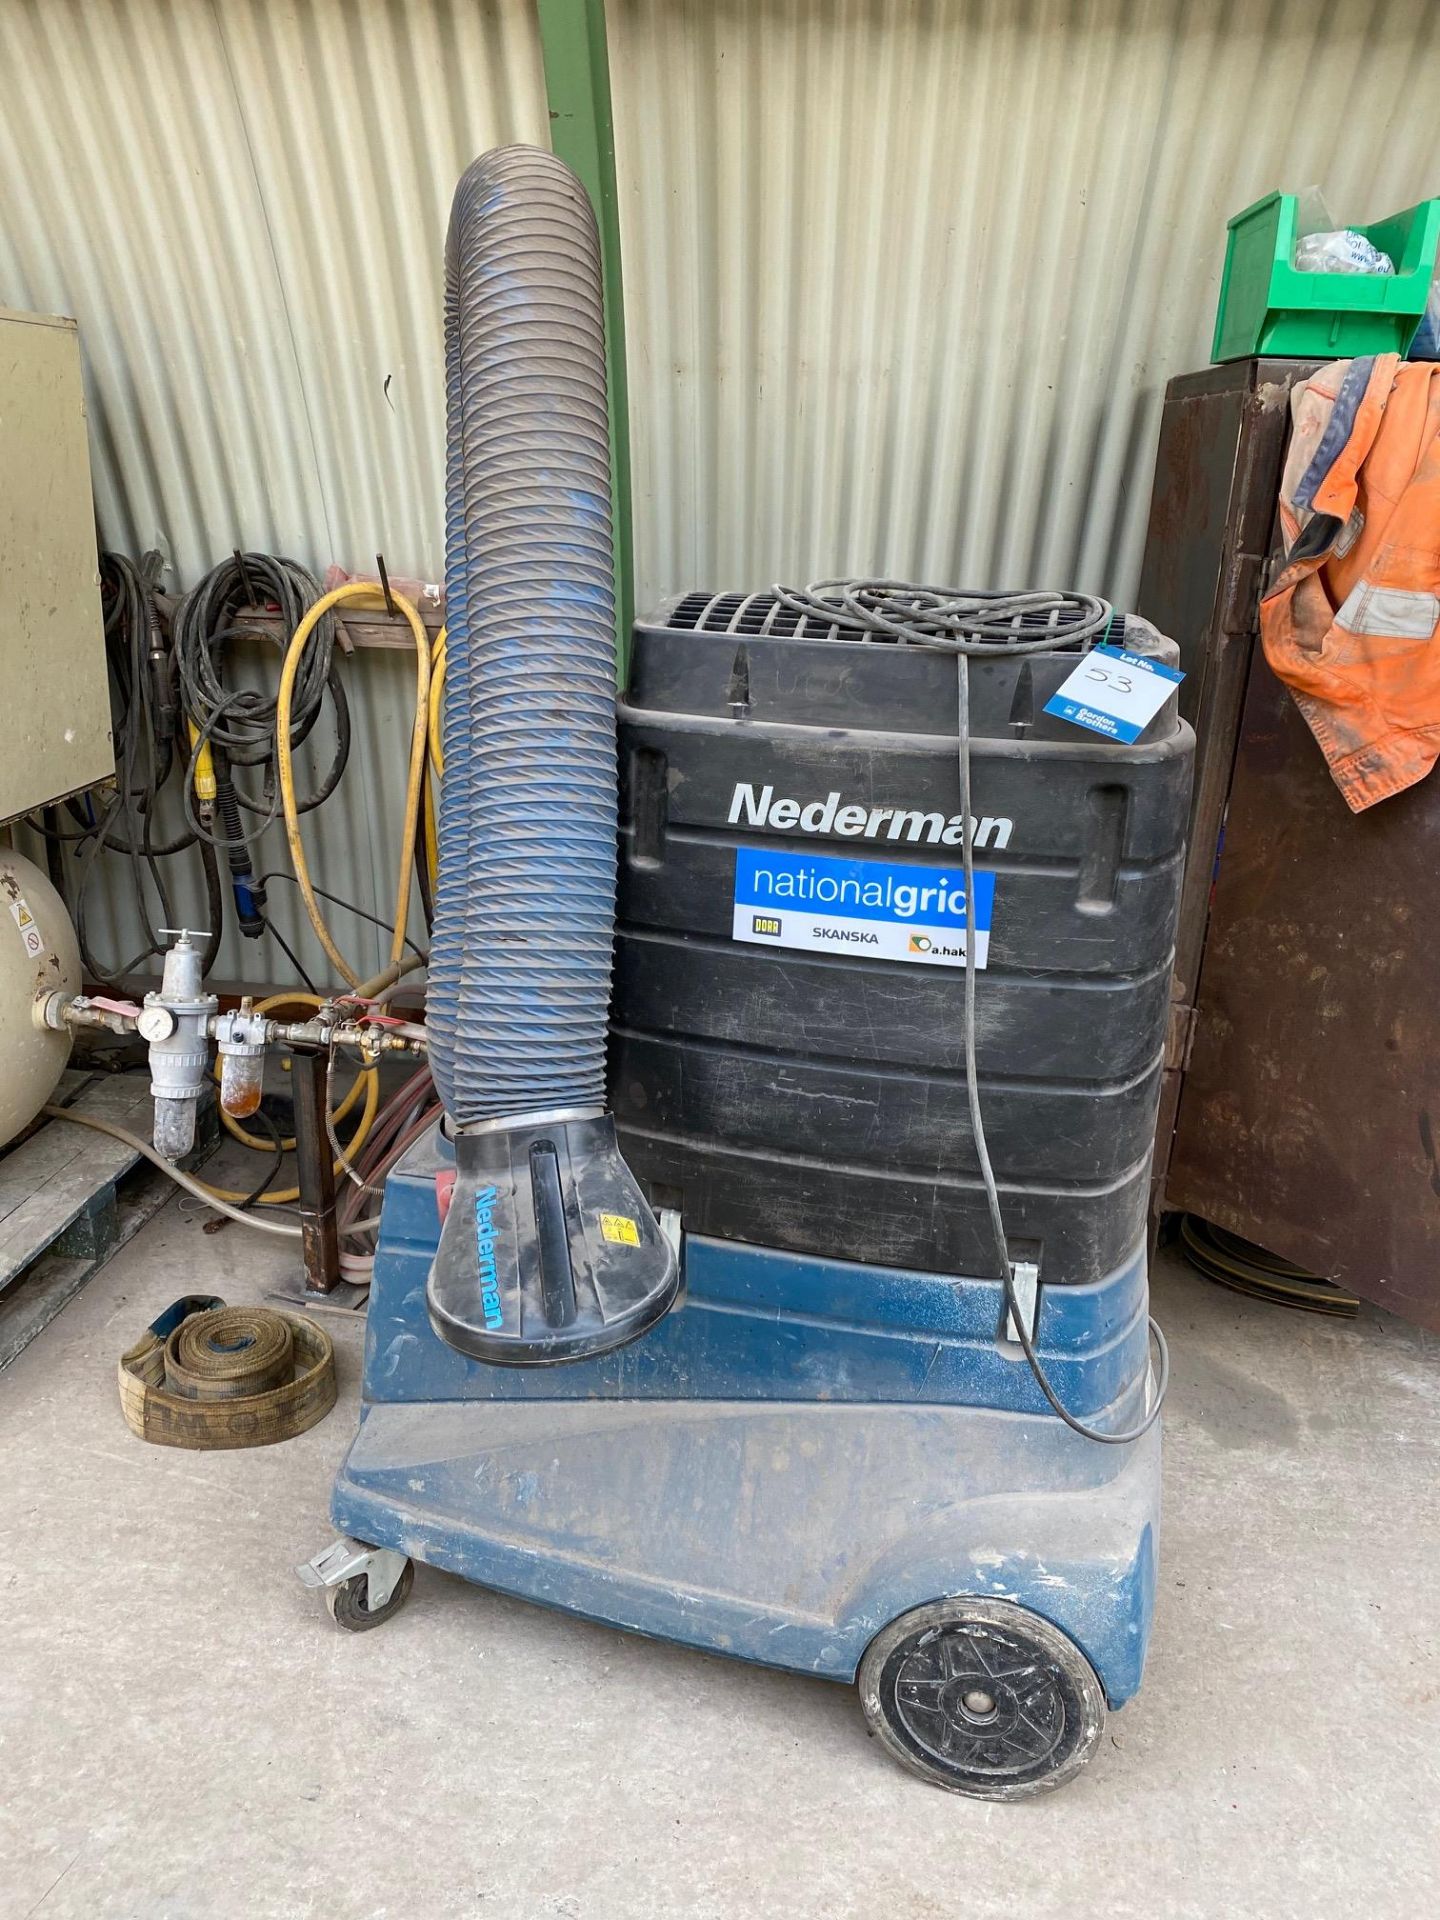 Nederman, Model: Filtercan 17441-03 12621445 welding Fume Extraction unit with adjustable fume